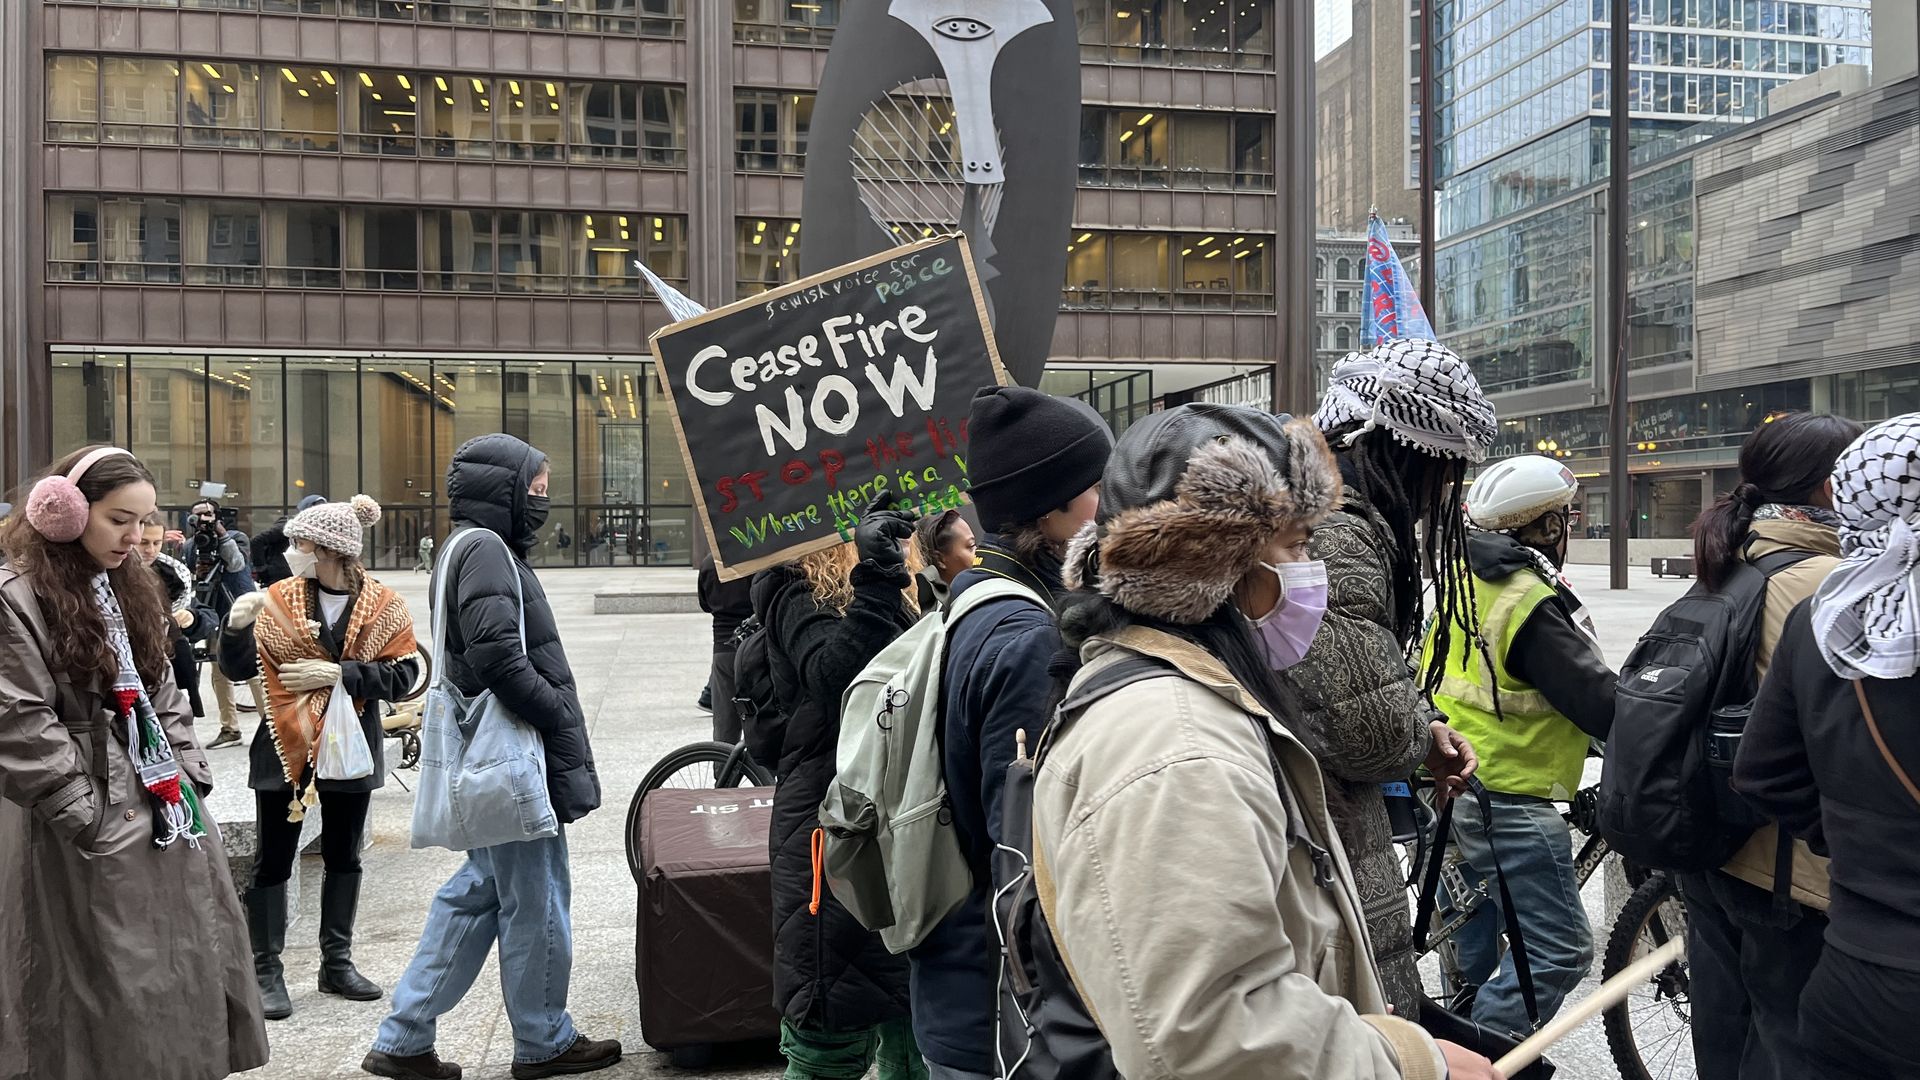 Protesters march in downtown Chicago, with a "Ceasefire now" sign.